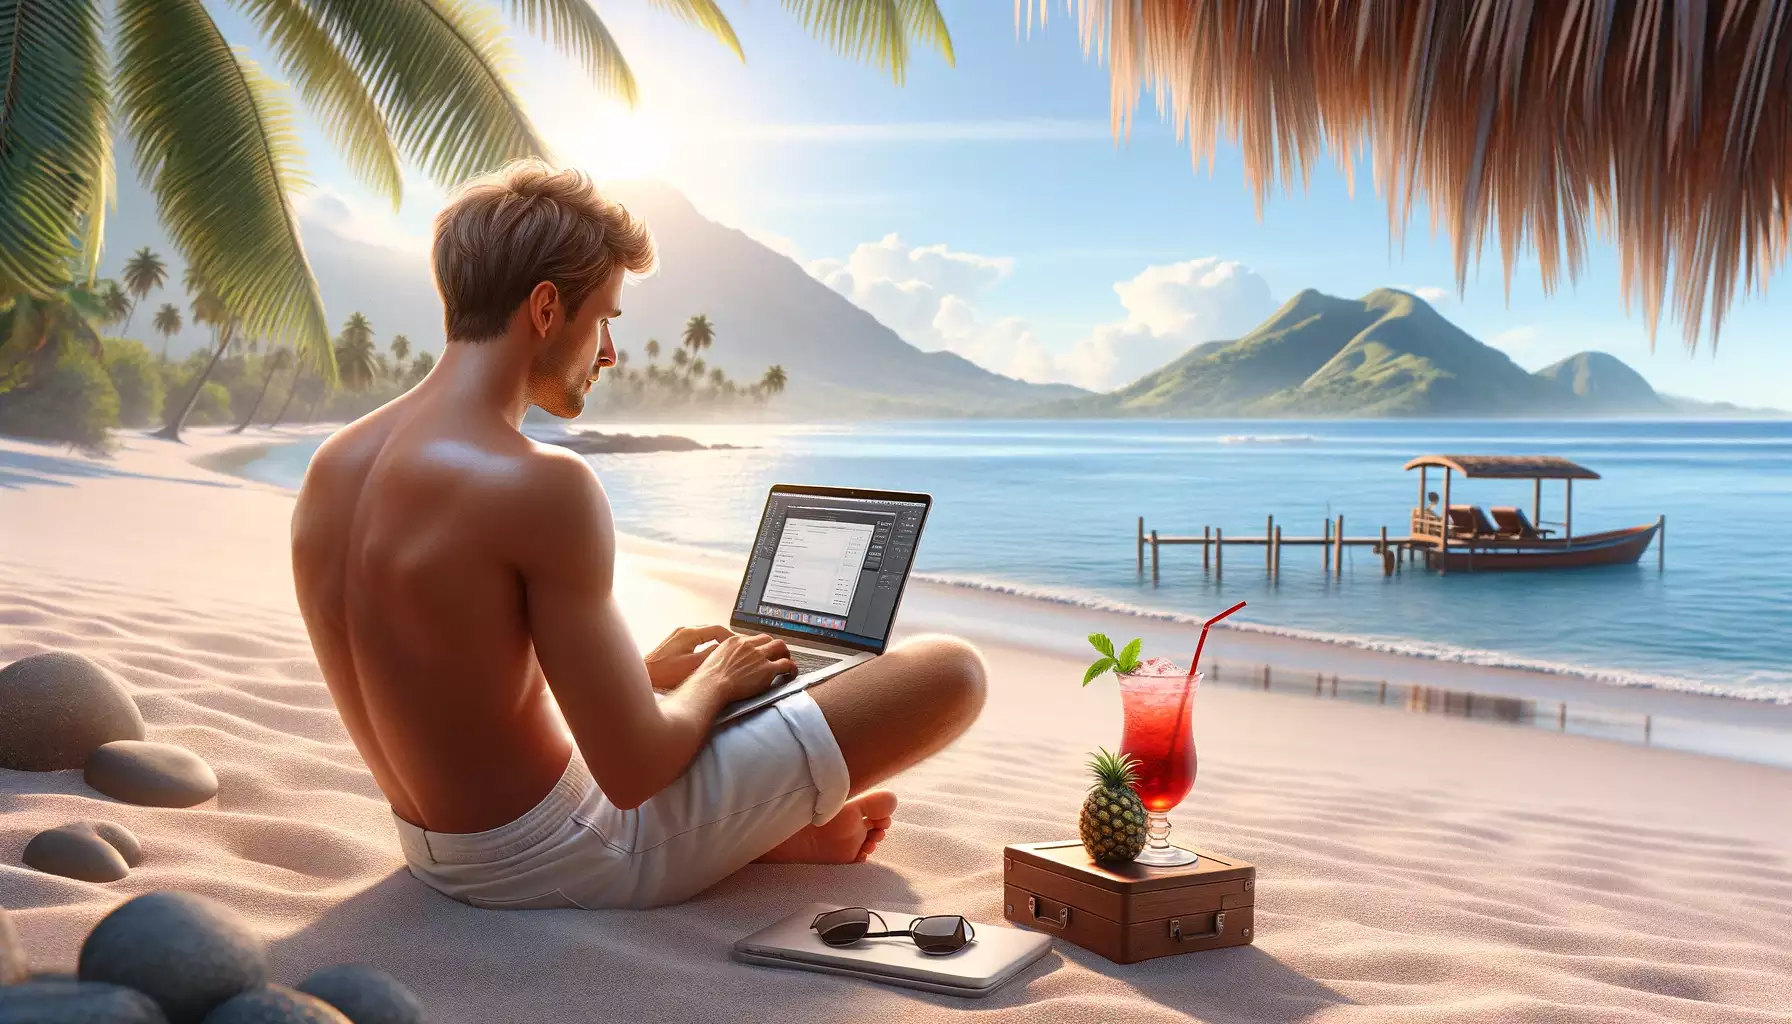 photo of a man sitting on a beach with a laptop